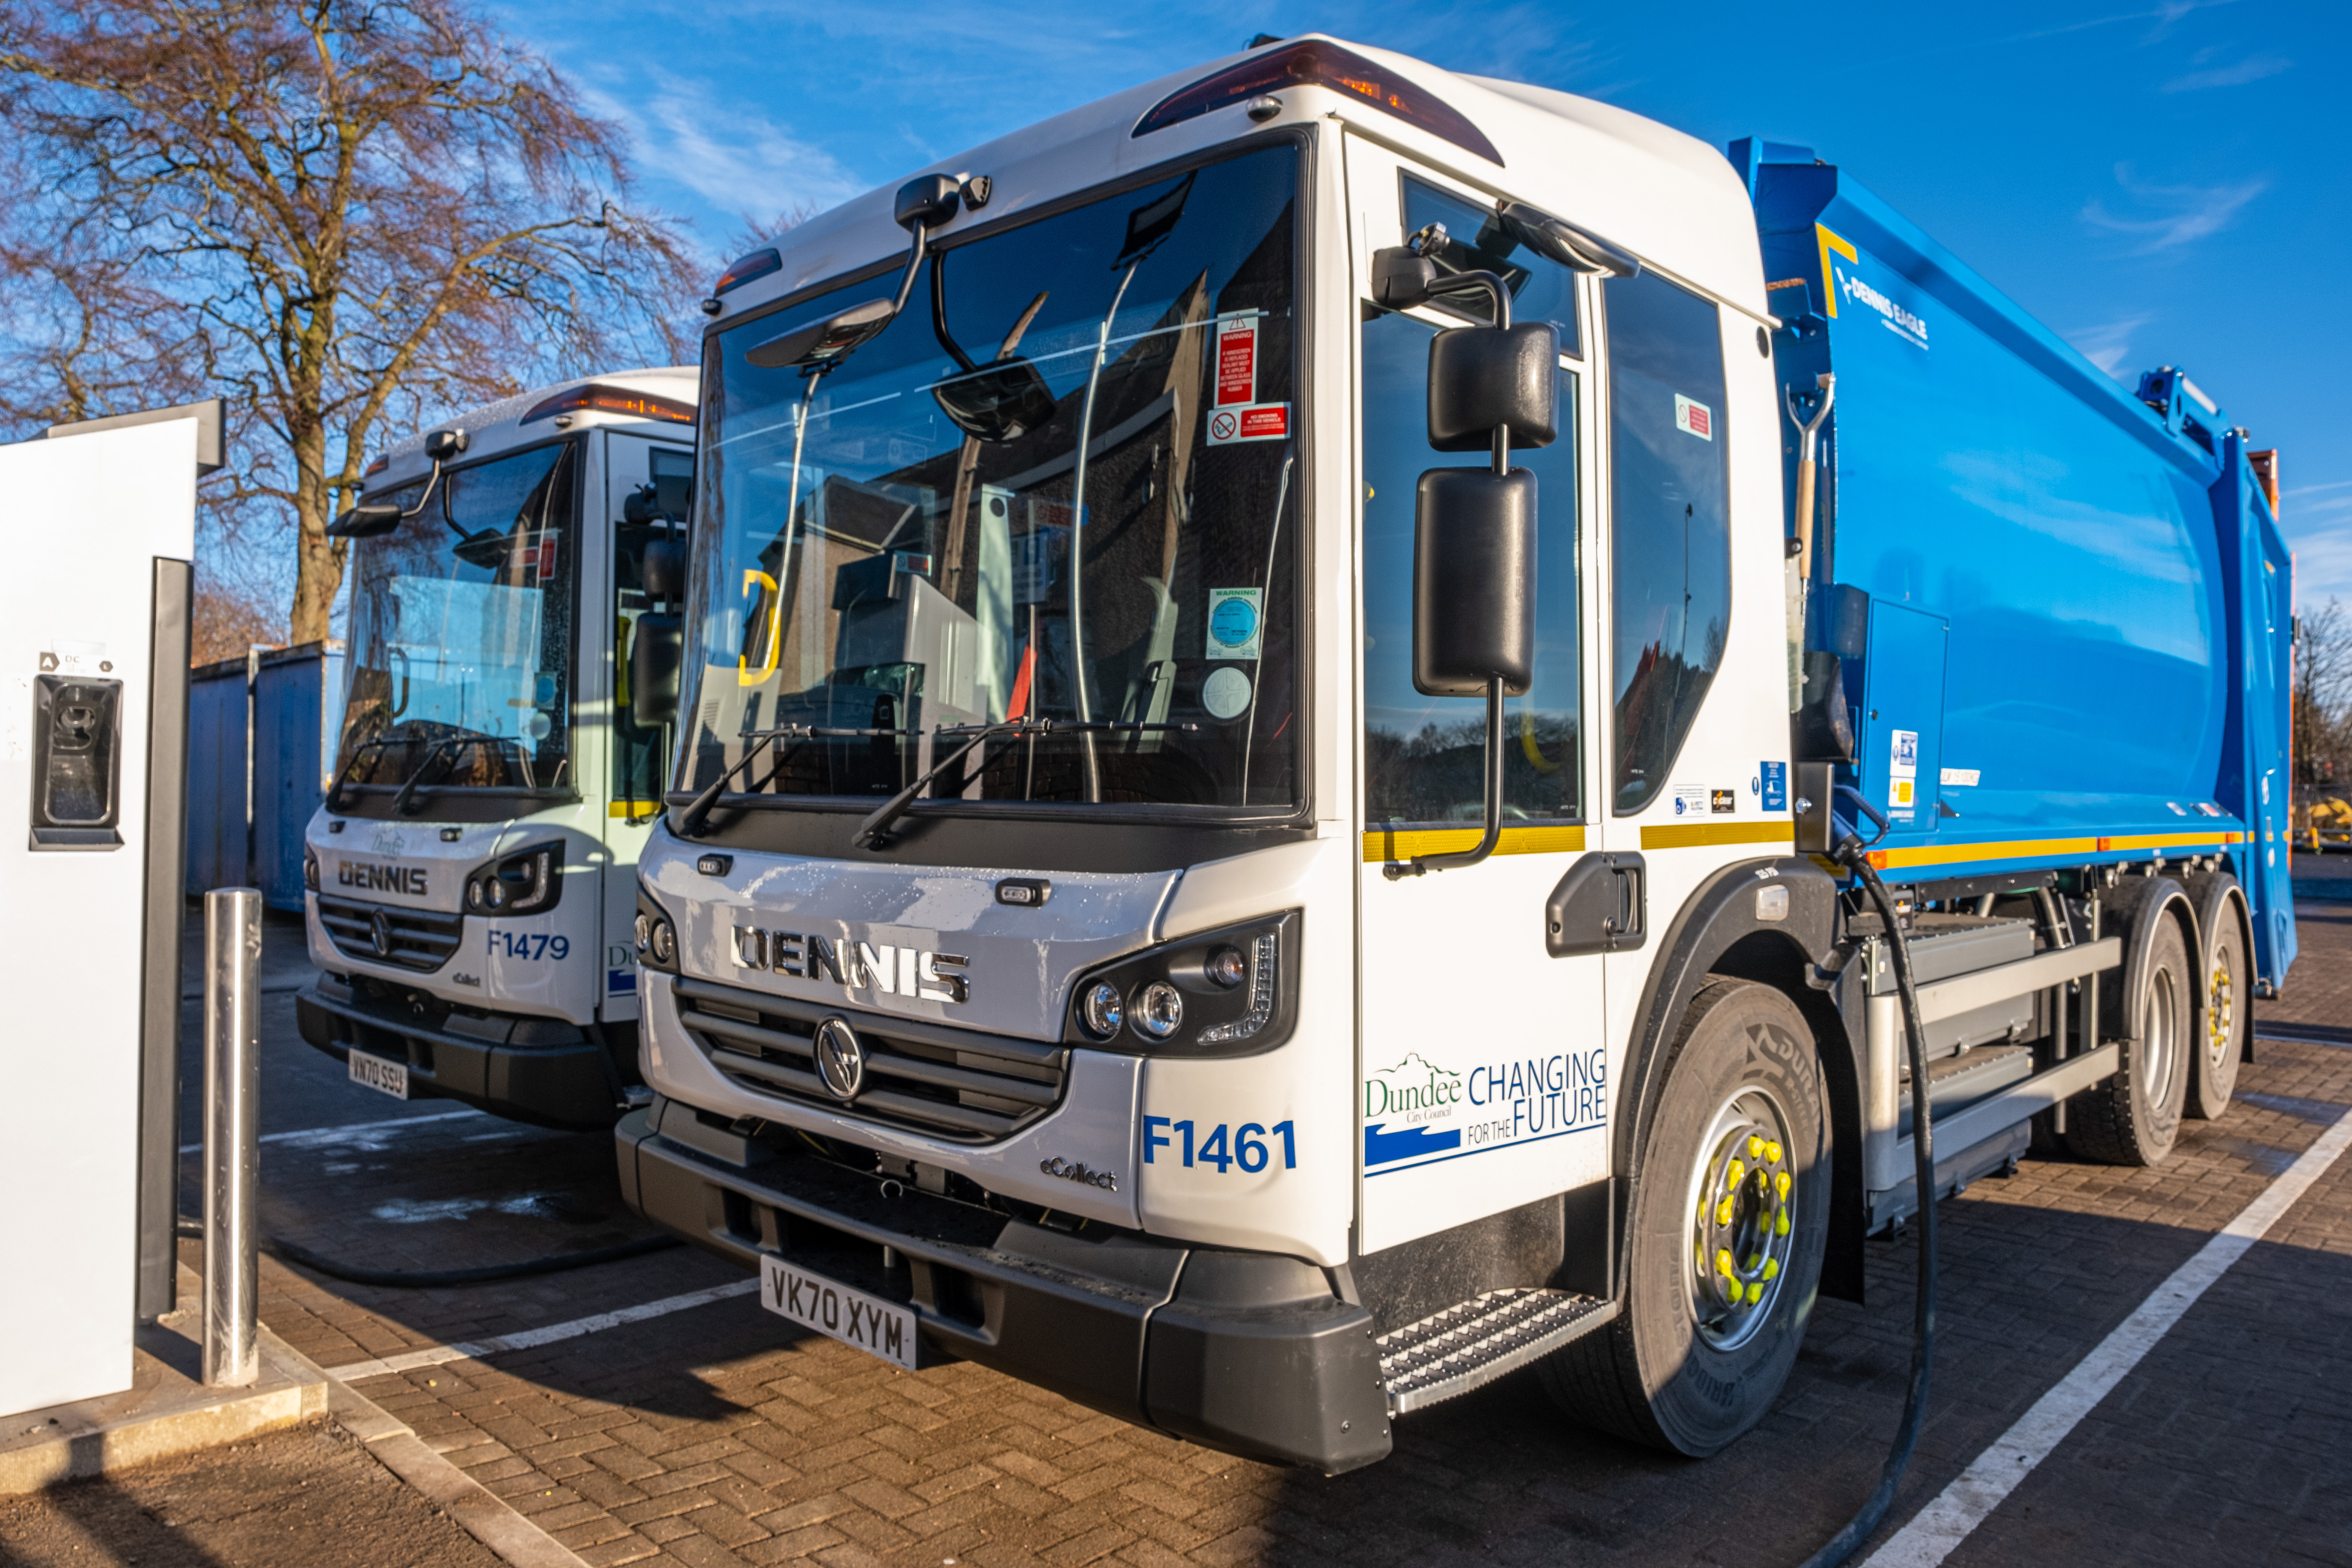 Electric HGVs have joined the Fleet